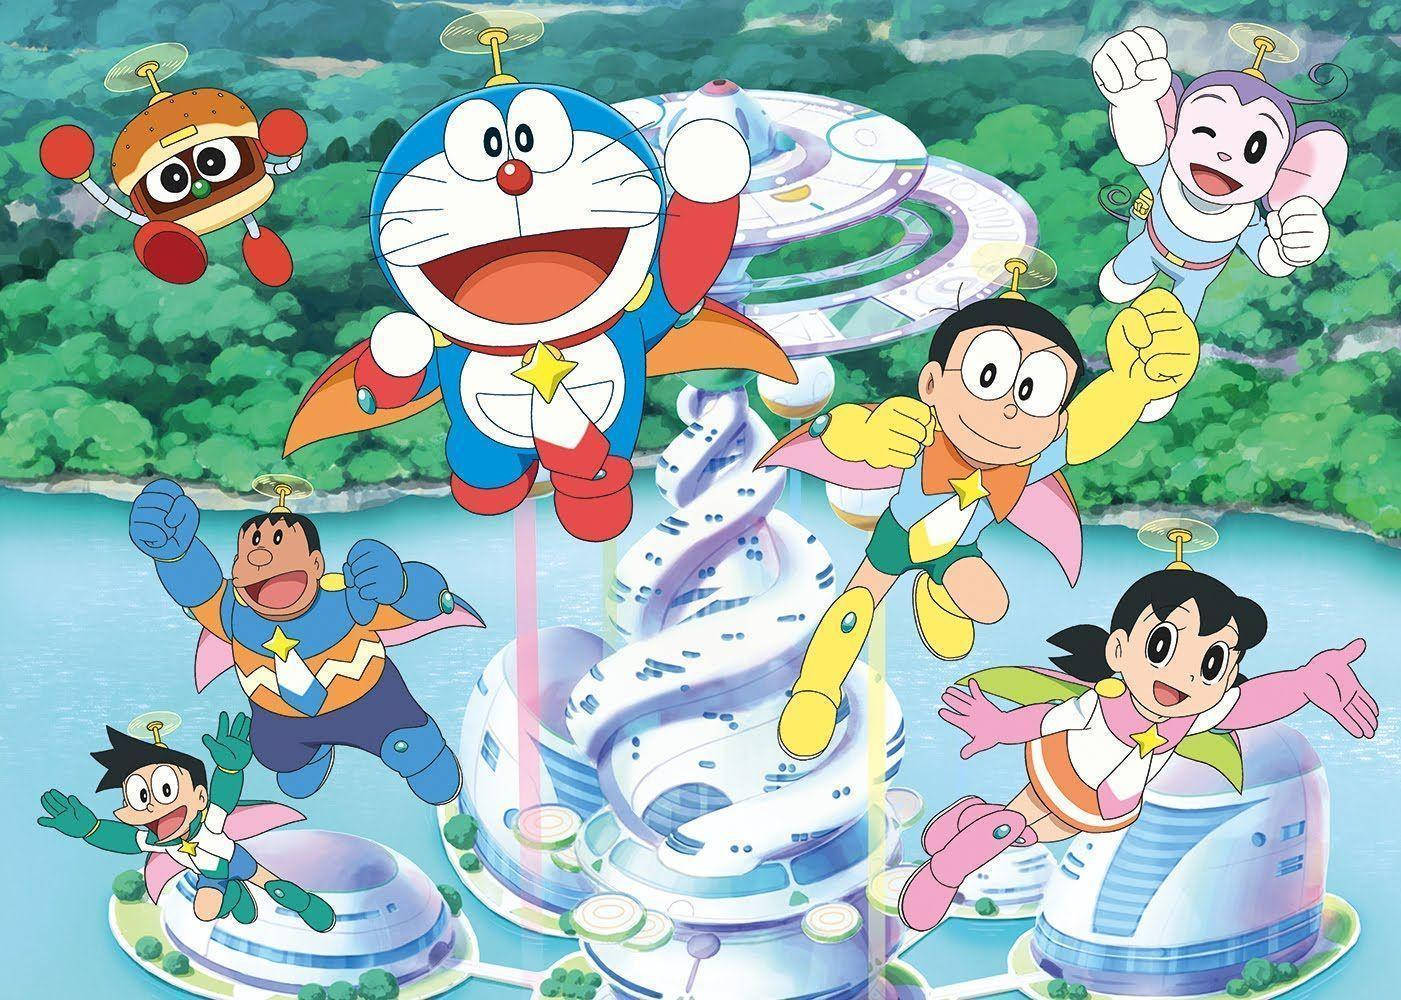 Doraemon Flying With Friends